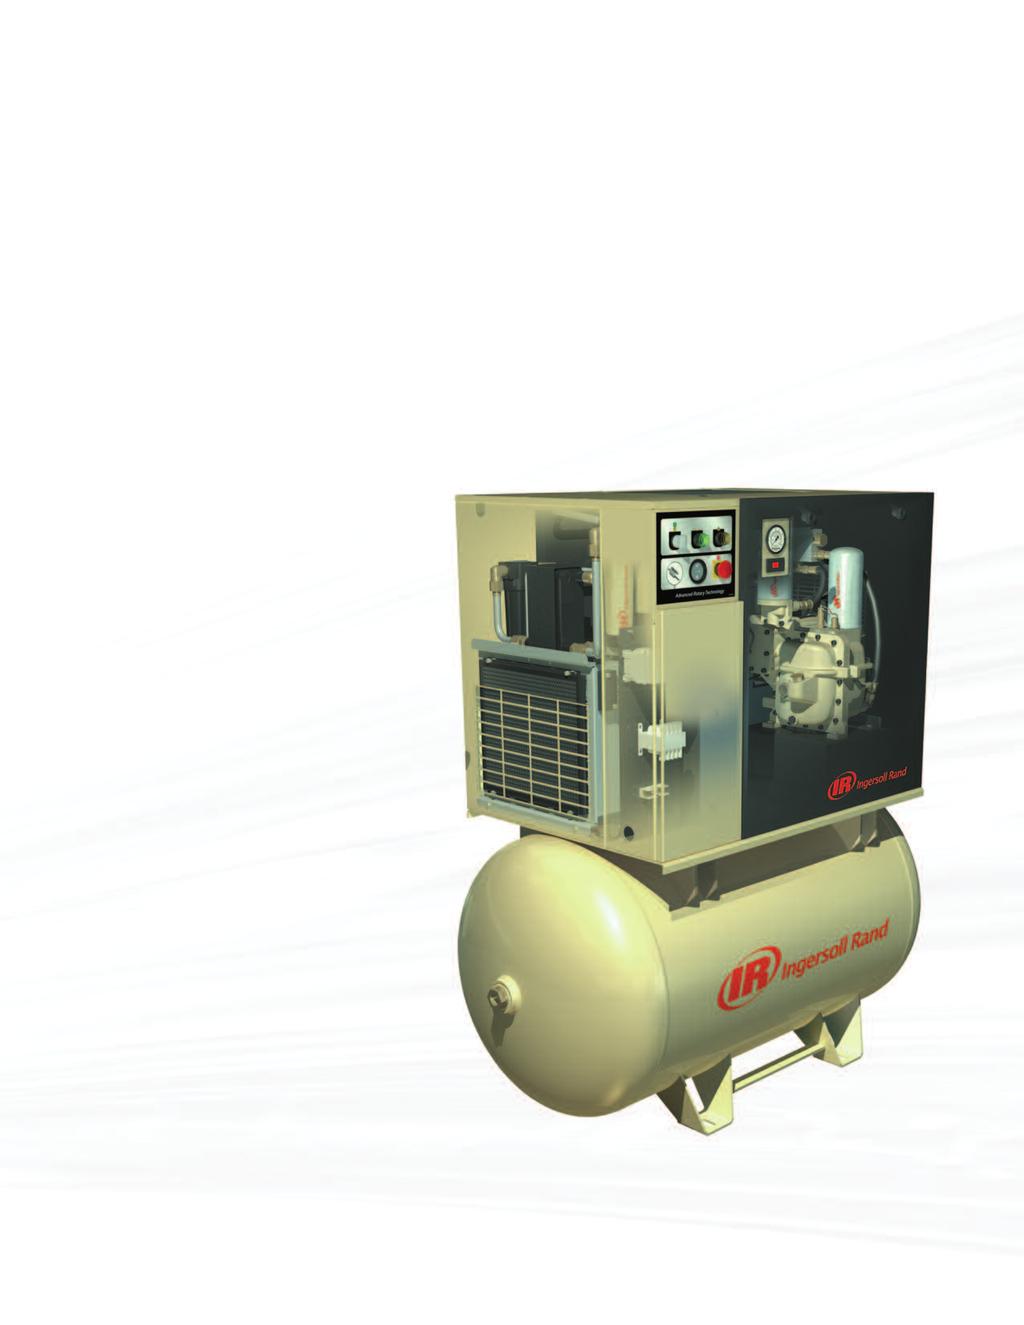 Exceptional Value Ultimate Reliability Maximum Uptime Ingersoll Rand is so confident in the performance of these compressors, that we offer a choice of extended warranty packages designed to provide